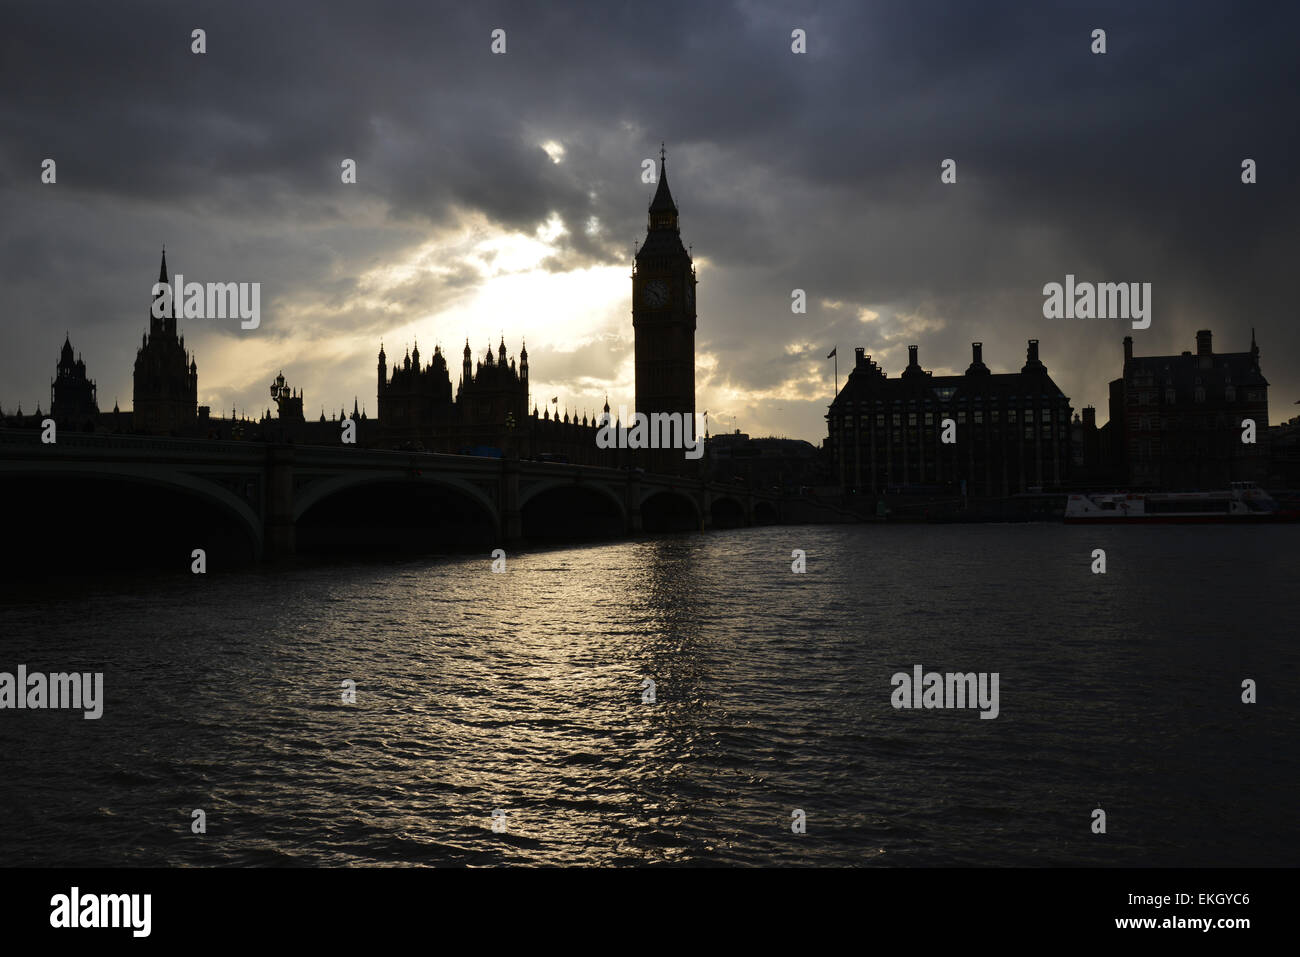 Palace of Westminster and Elizabeth Tower, London. Stock Photo